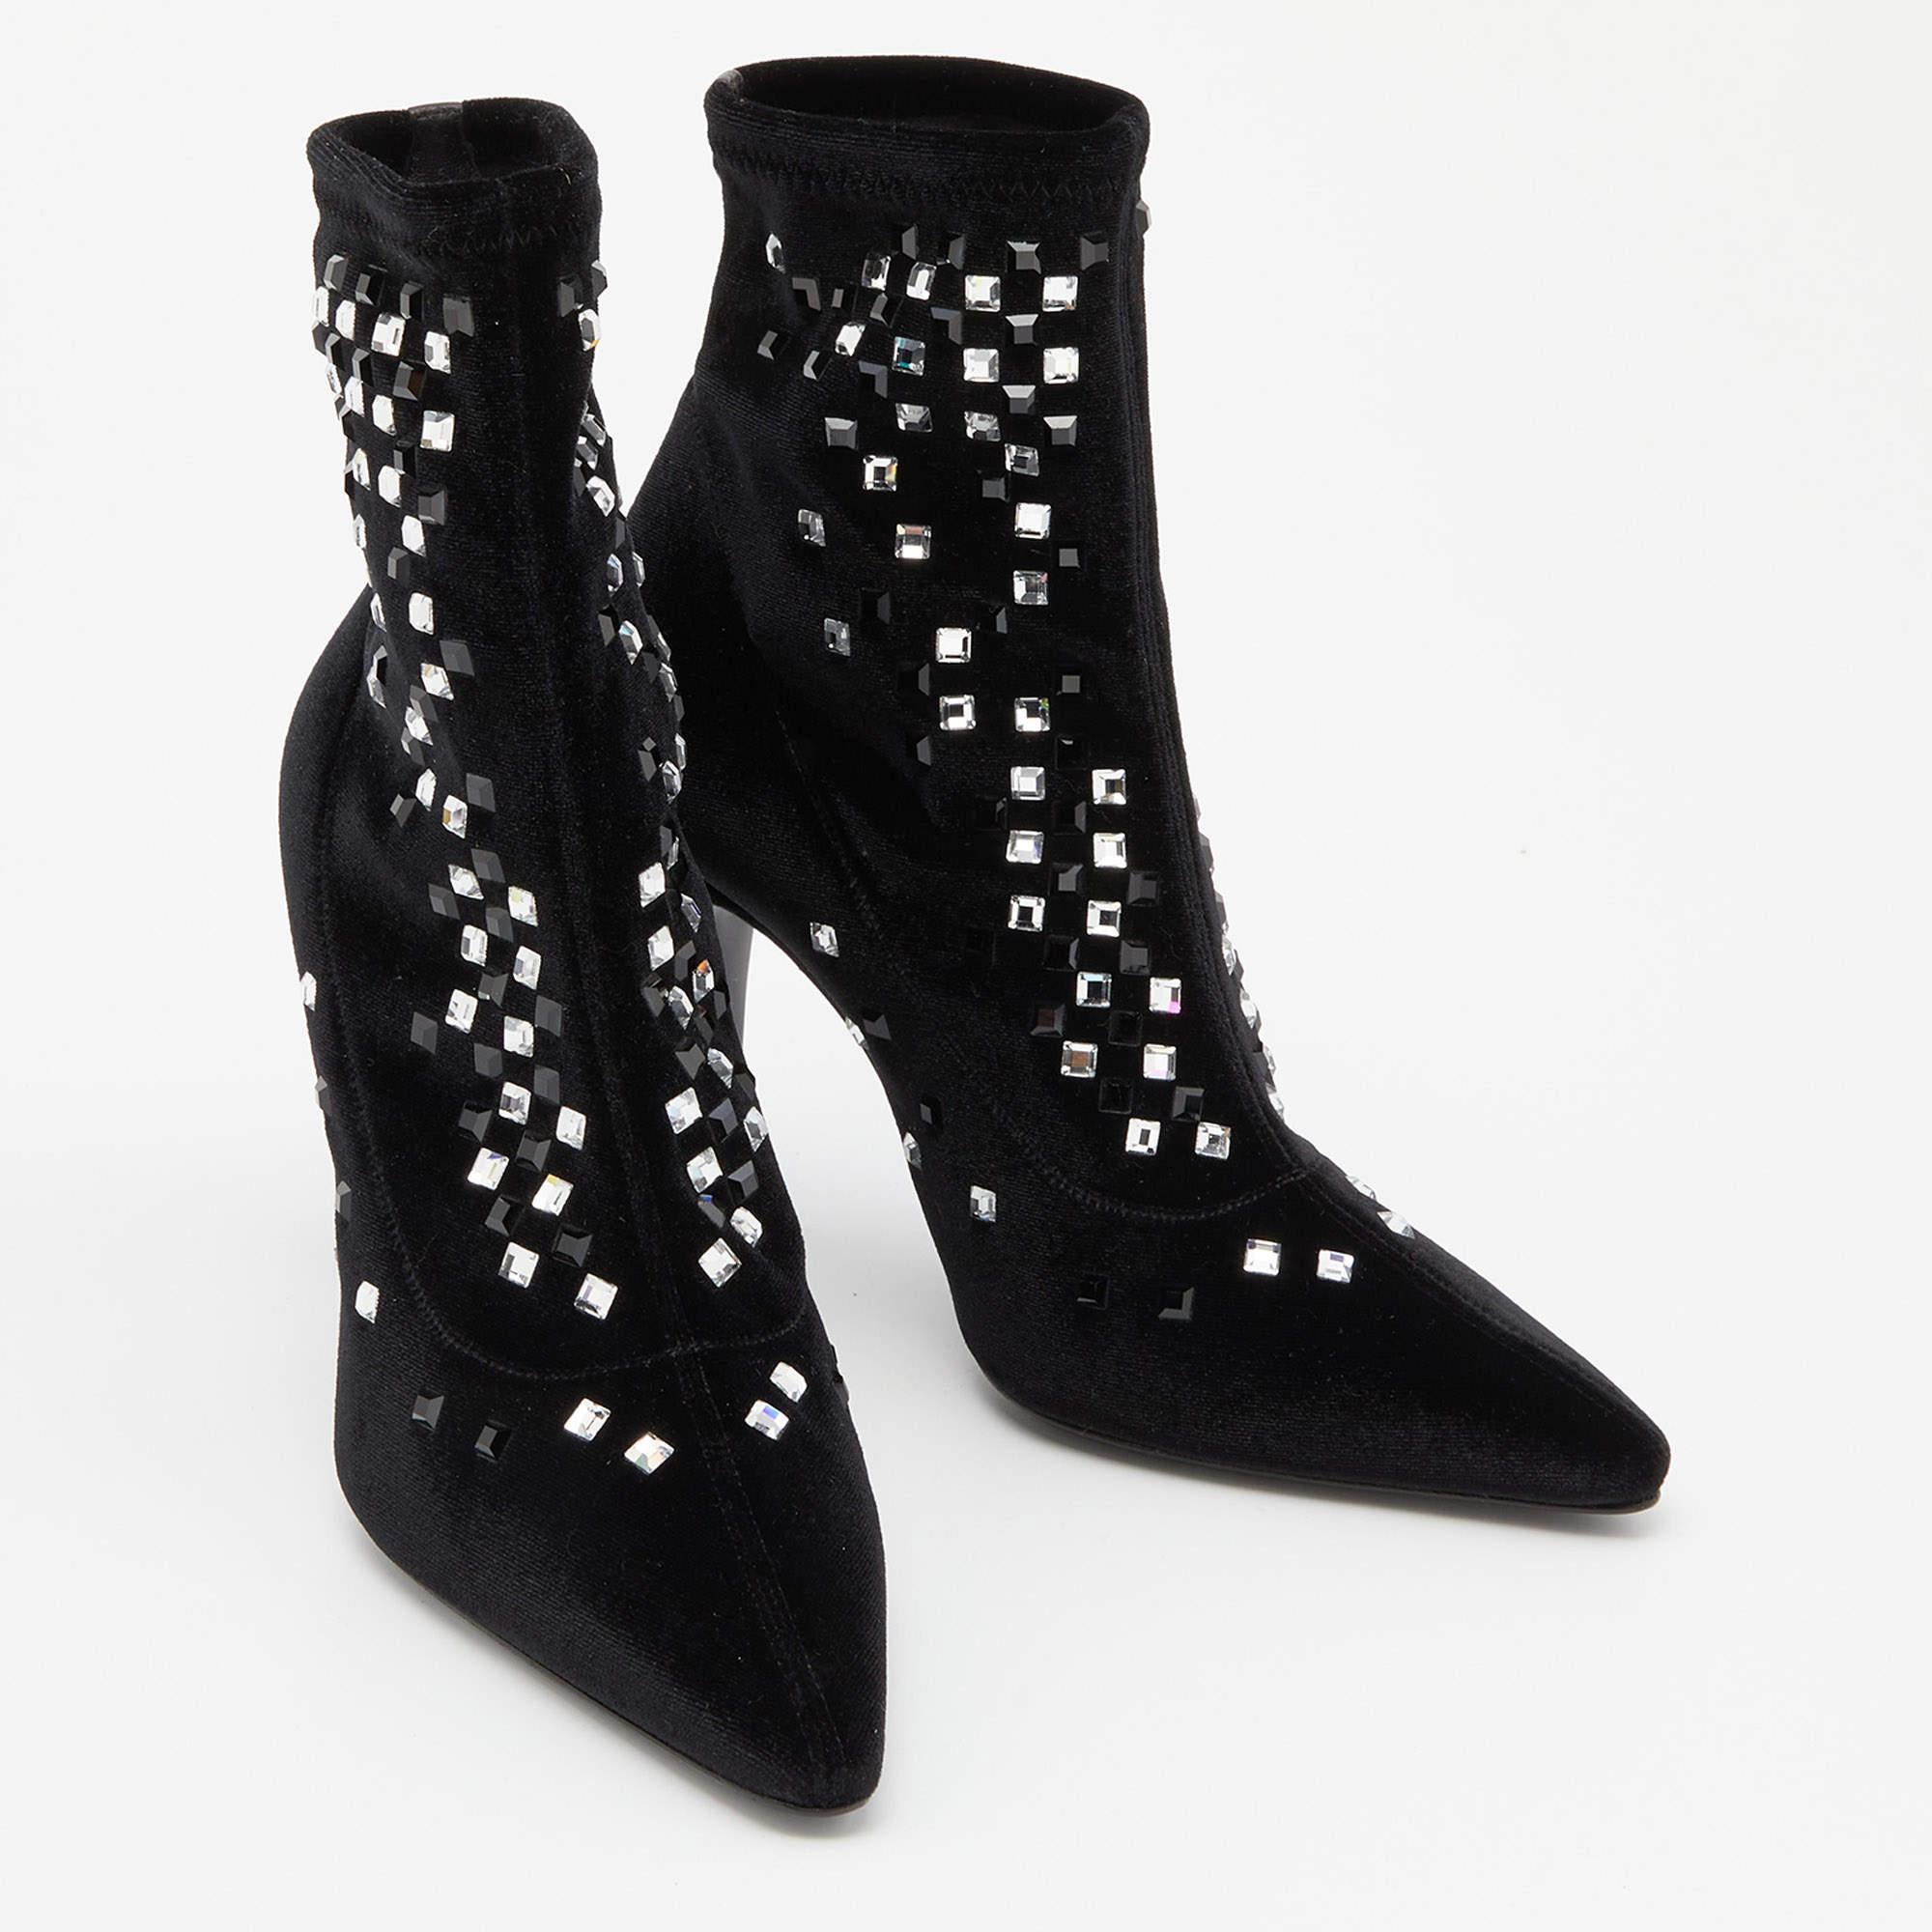 Giuseppe Zanotti Black Velvet Crystal Embellished Ankle Booties Size 38 In New Condition For Sale In Dubai, Al Qouz 2